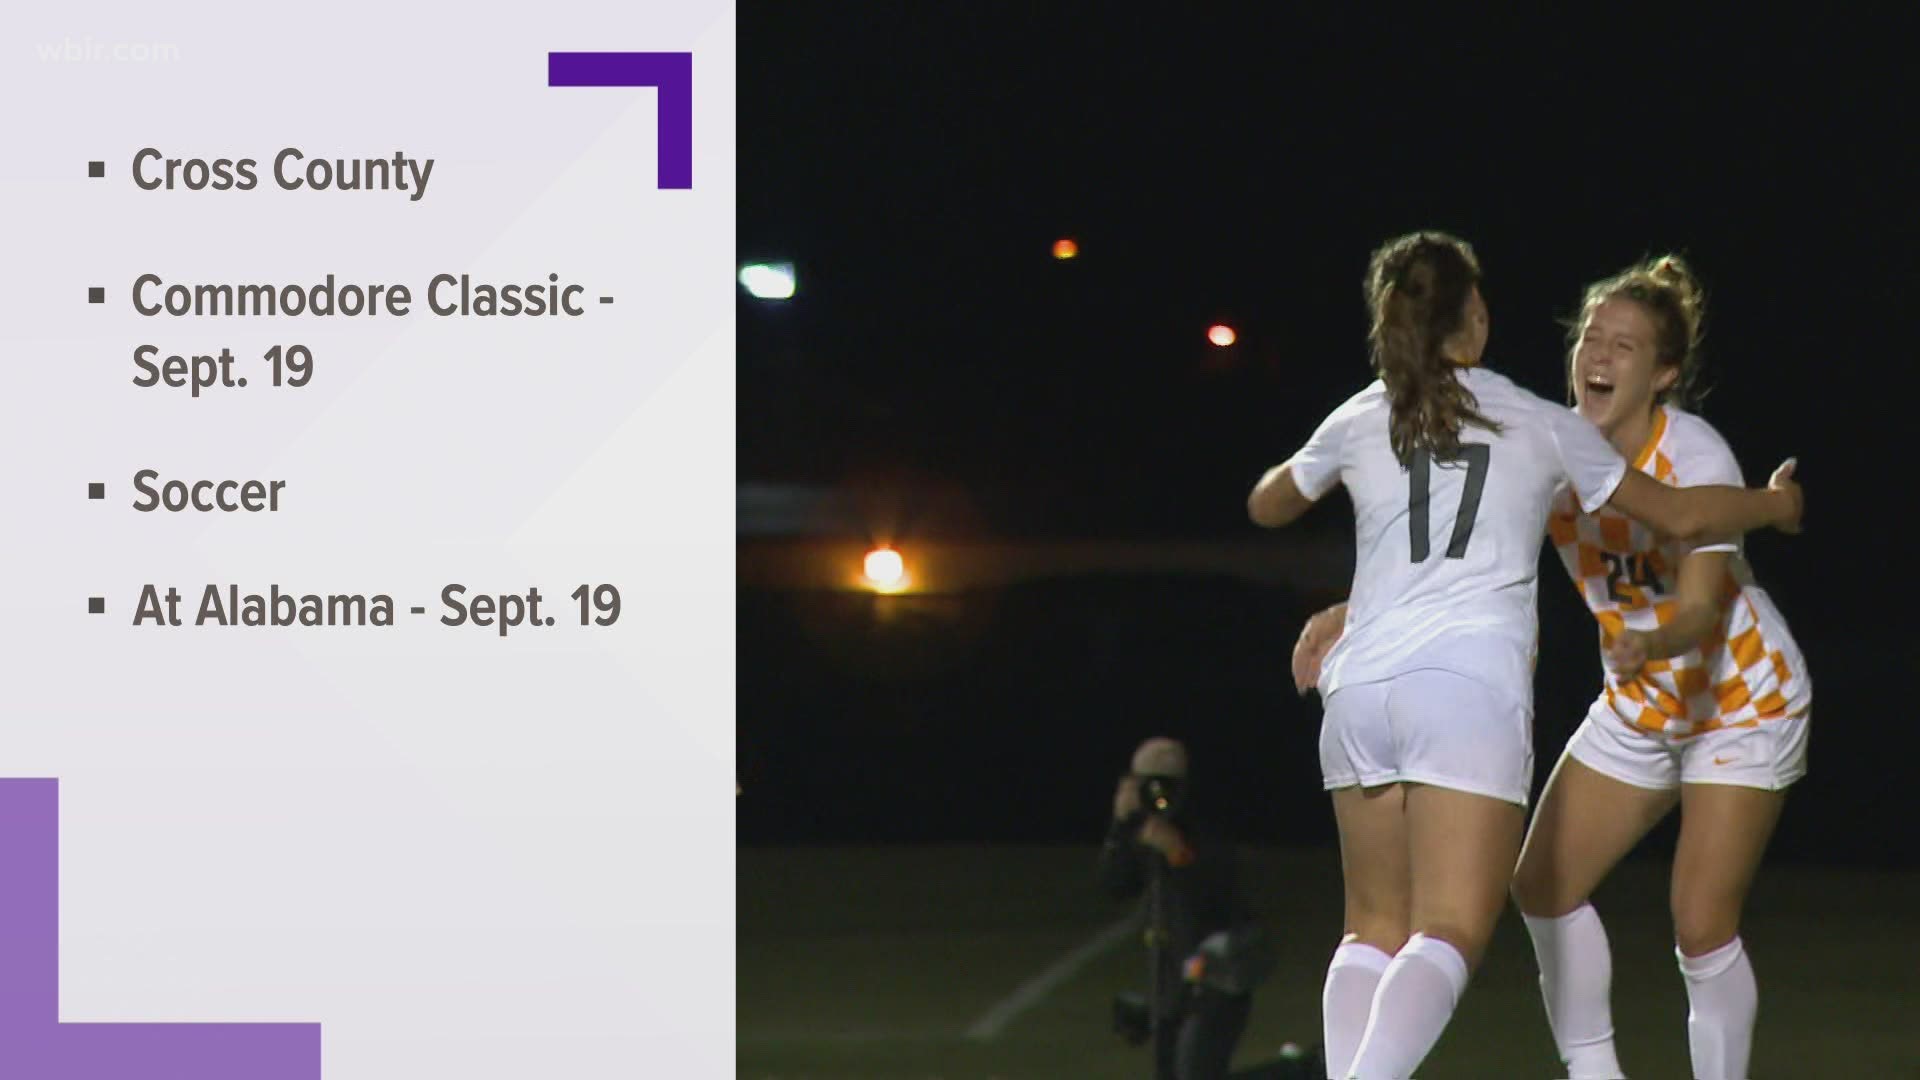 Cross county is competing in the Commodore Classic in Nashville with six other SEC schools... while the soccer team is playing Alabama in Tuscaloosa.